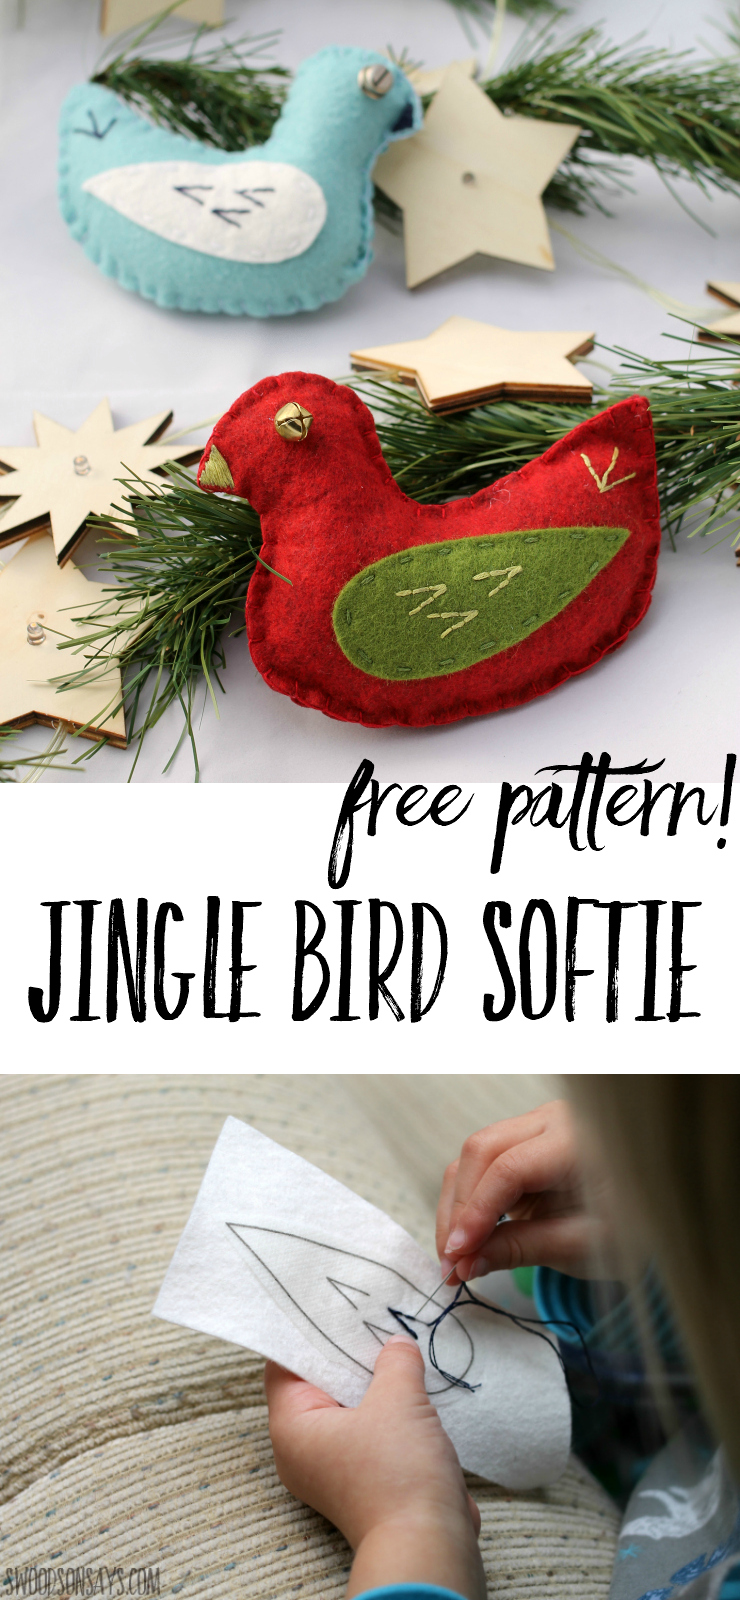 Get cozy this winter and sew a jingle bird! This simple softie is designed for beginner sewists and is perfect for kids to sew. Follow the free pattern to sew a sweet little bird to snuggle or hang on the tree! #softiepattern #diyornament #sewingforkids